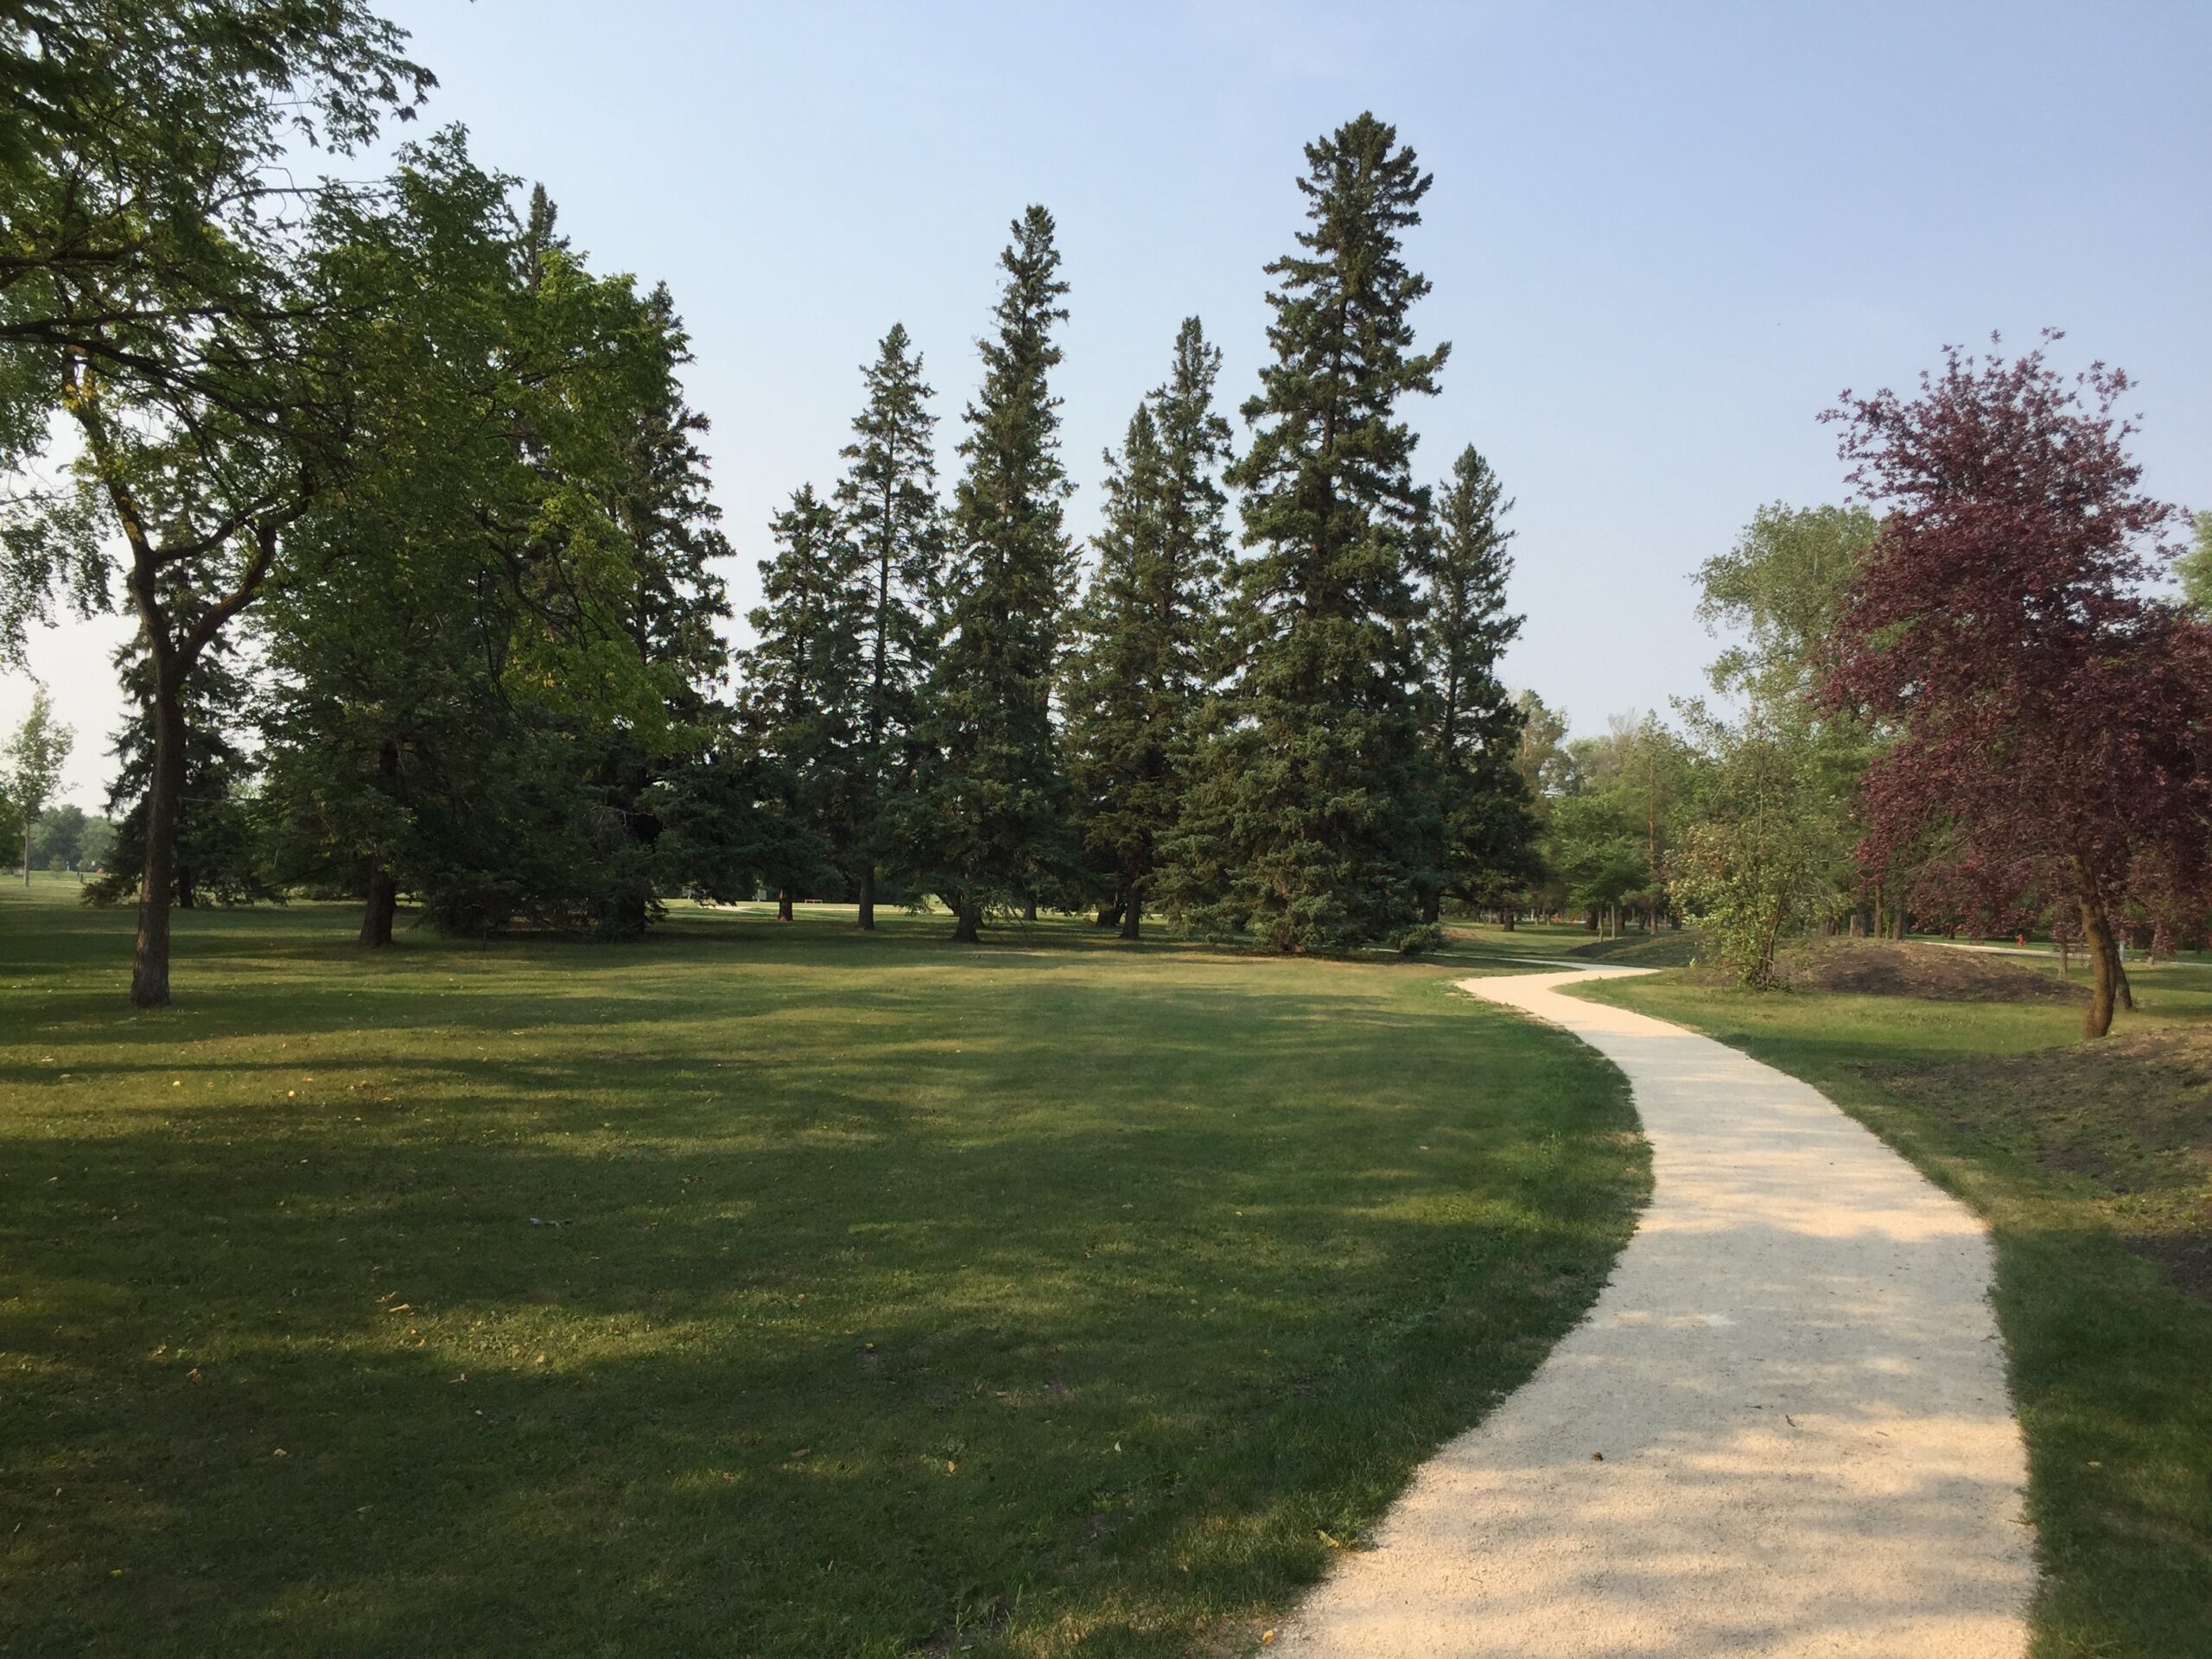 Featured Image for “PROVINCE ANNOUNCES FUNDING FOR NEW TRAIL, TRAIL ENHANCEMENTS AT TWO WINNIPEG LOCATIONS”